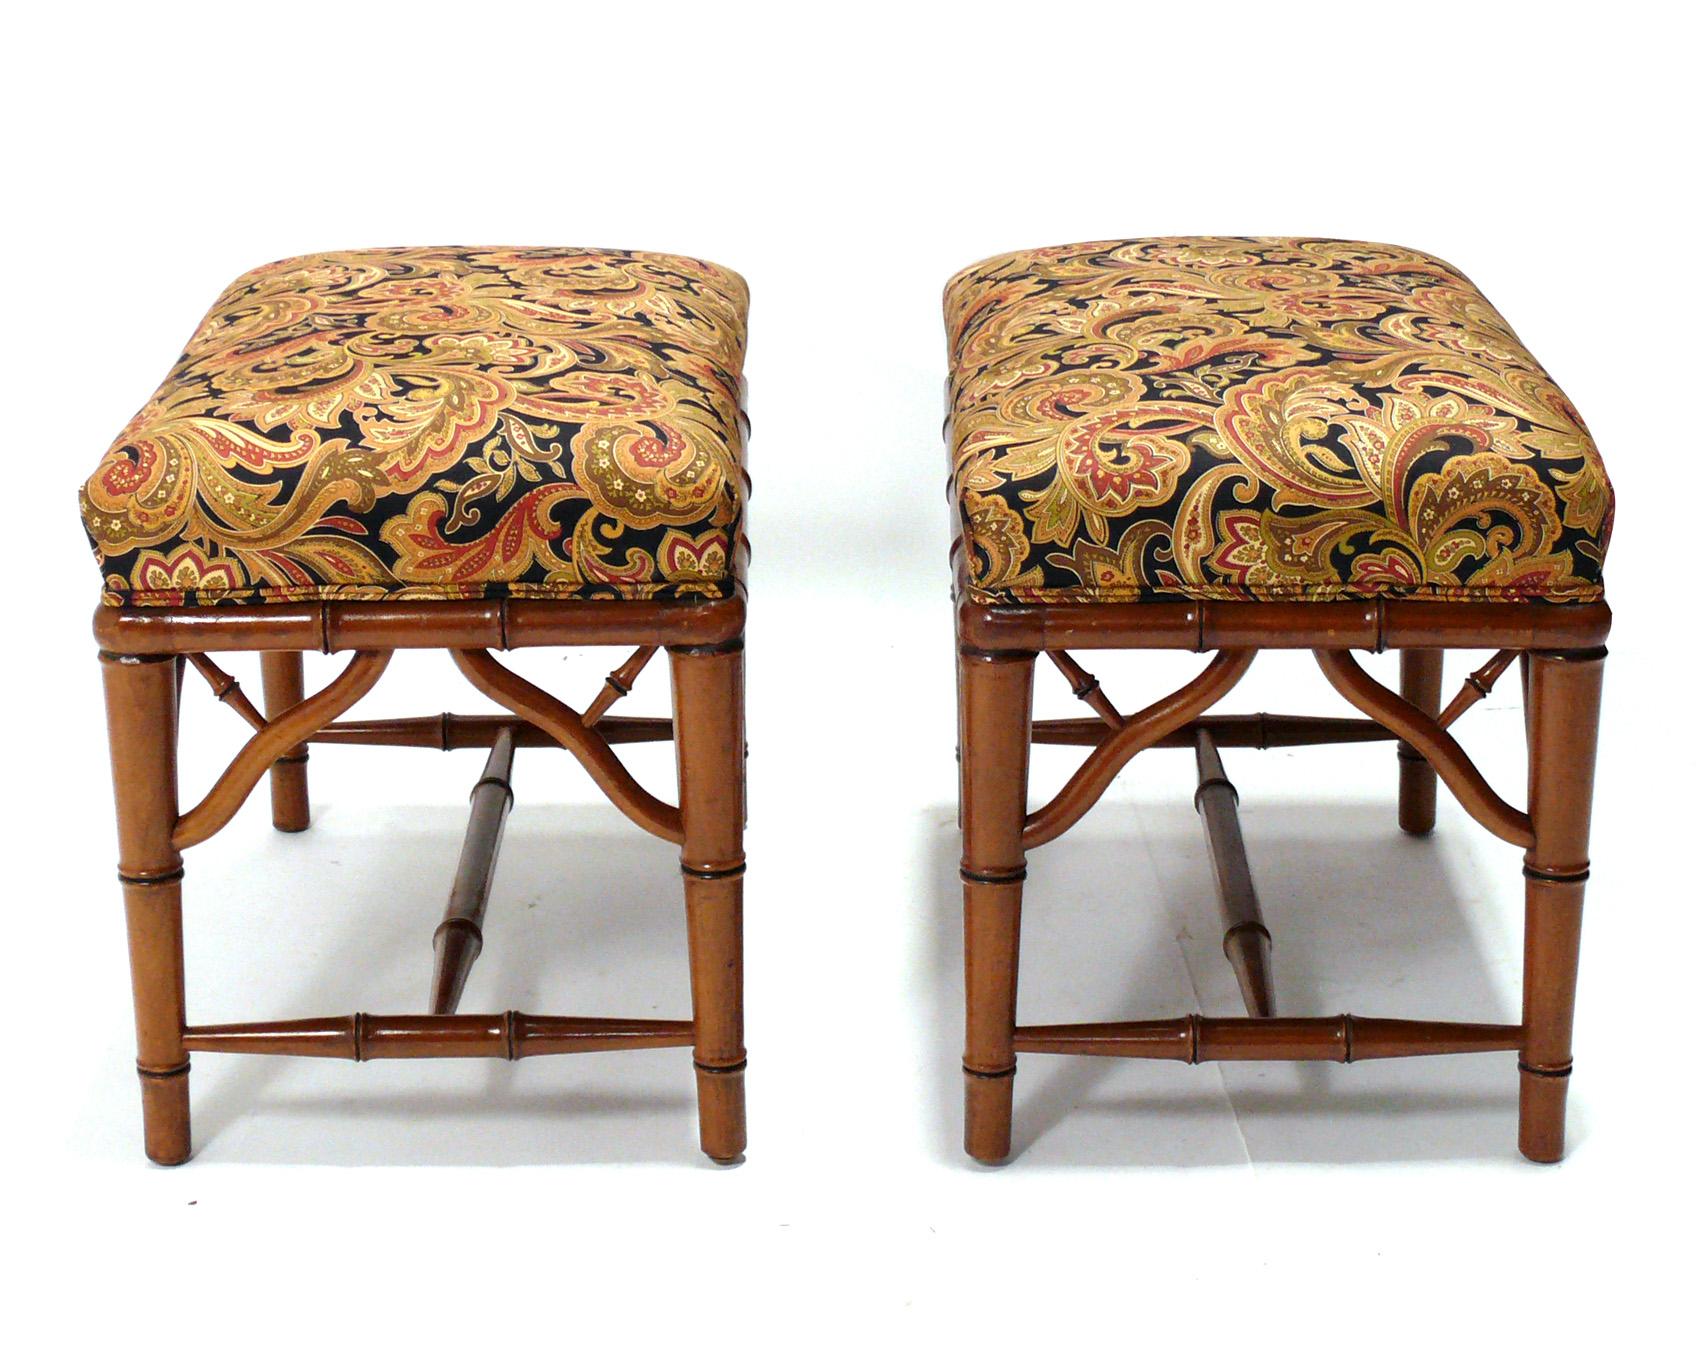 Pair of Faux bamboo wood stools or benches, American, circa 1960s. These pair of stools are currently being reupholstered and can be completed in your fabric. Simply send 1.5 yards of your fabric after purchase. The price noted includes reupholstery